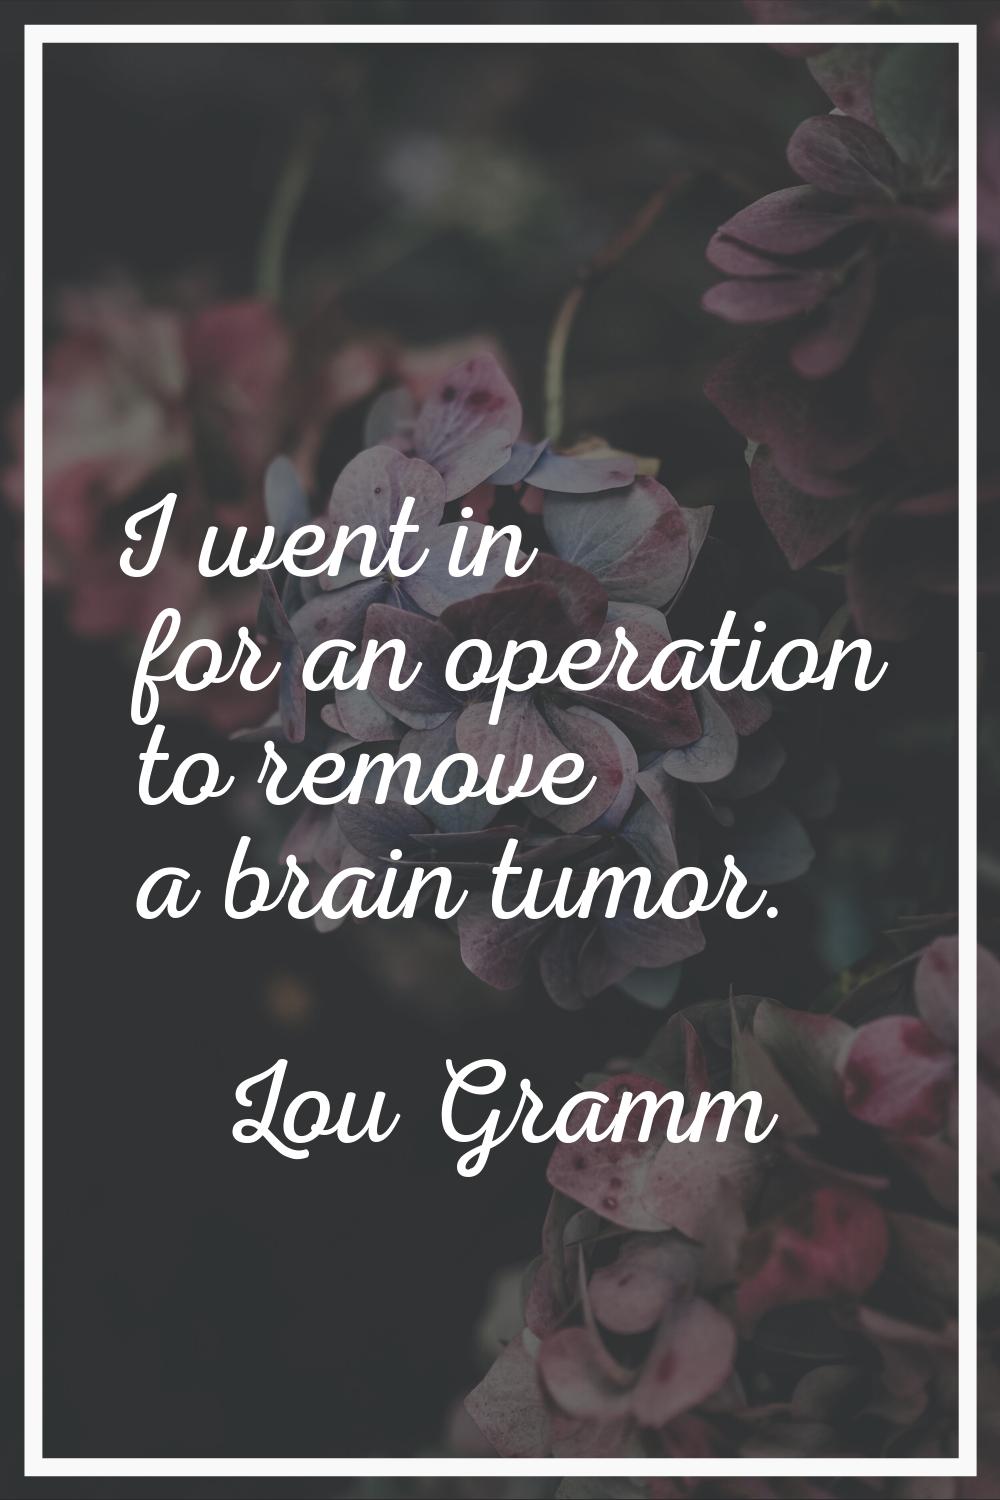 I went in for an operation to remove a brain tumor.